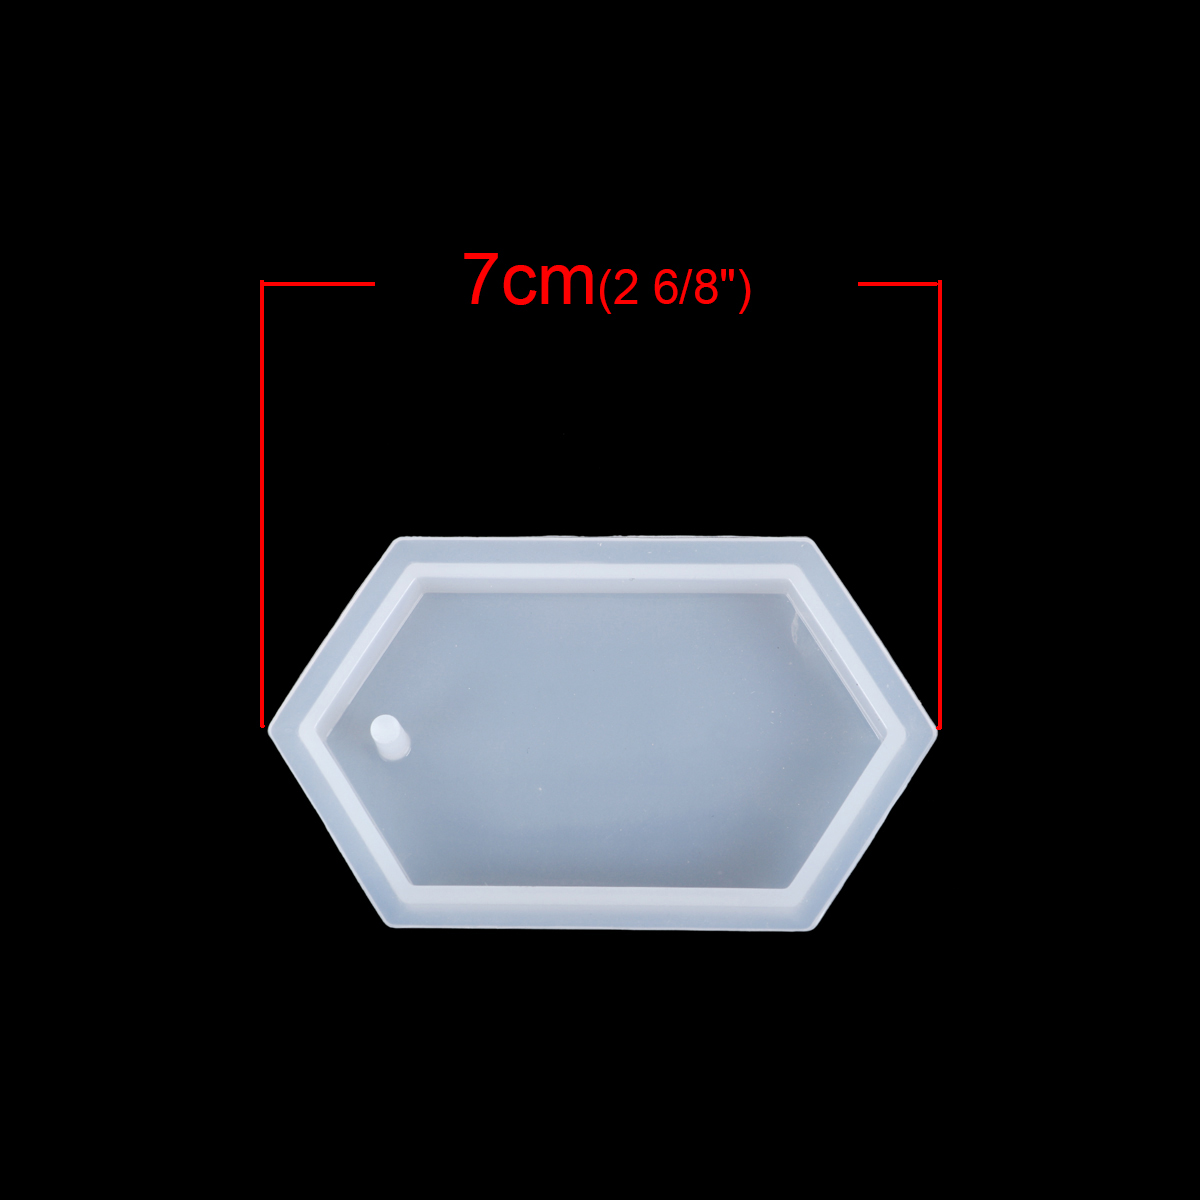 Picture of Silicone Resin Mold For Jewelry Making Hexagon White 70mm(2 6/8") x 38mm(1 4/8"), 1 Piece